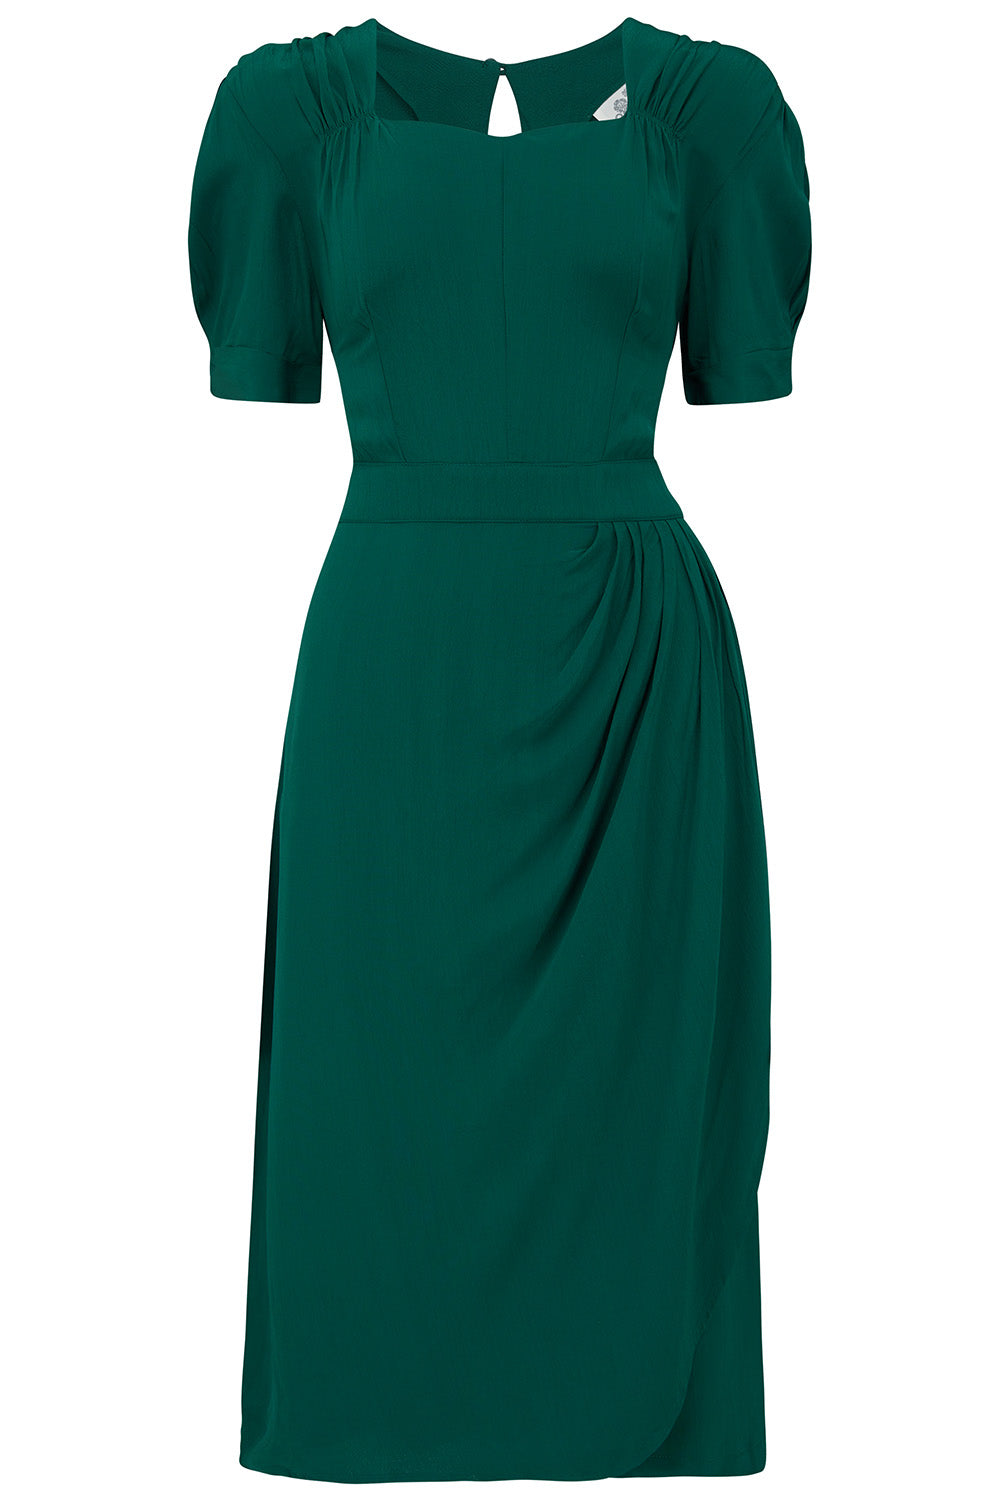 Shelly Dress in Vintage Green, A Classic 1940s Inspired wiggle dress, True Vintage Style - True and authentic vintage style clothing, inspired by the Classic styles of CC41 , WW2 and the fun 1950s RocknRoll era, for everyday wear plus events like Goodwood Revival, Twinwood Festival and Viva Las Vegas Rockabilly Weekend Rock n Romance The Seamstress of Bloomsbury